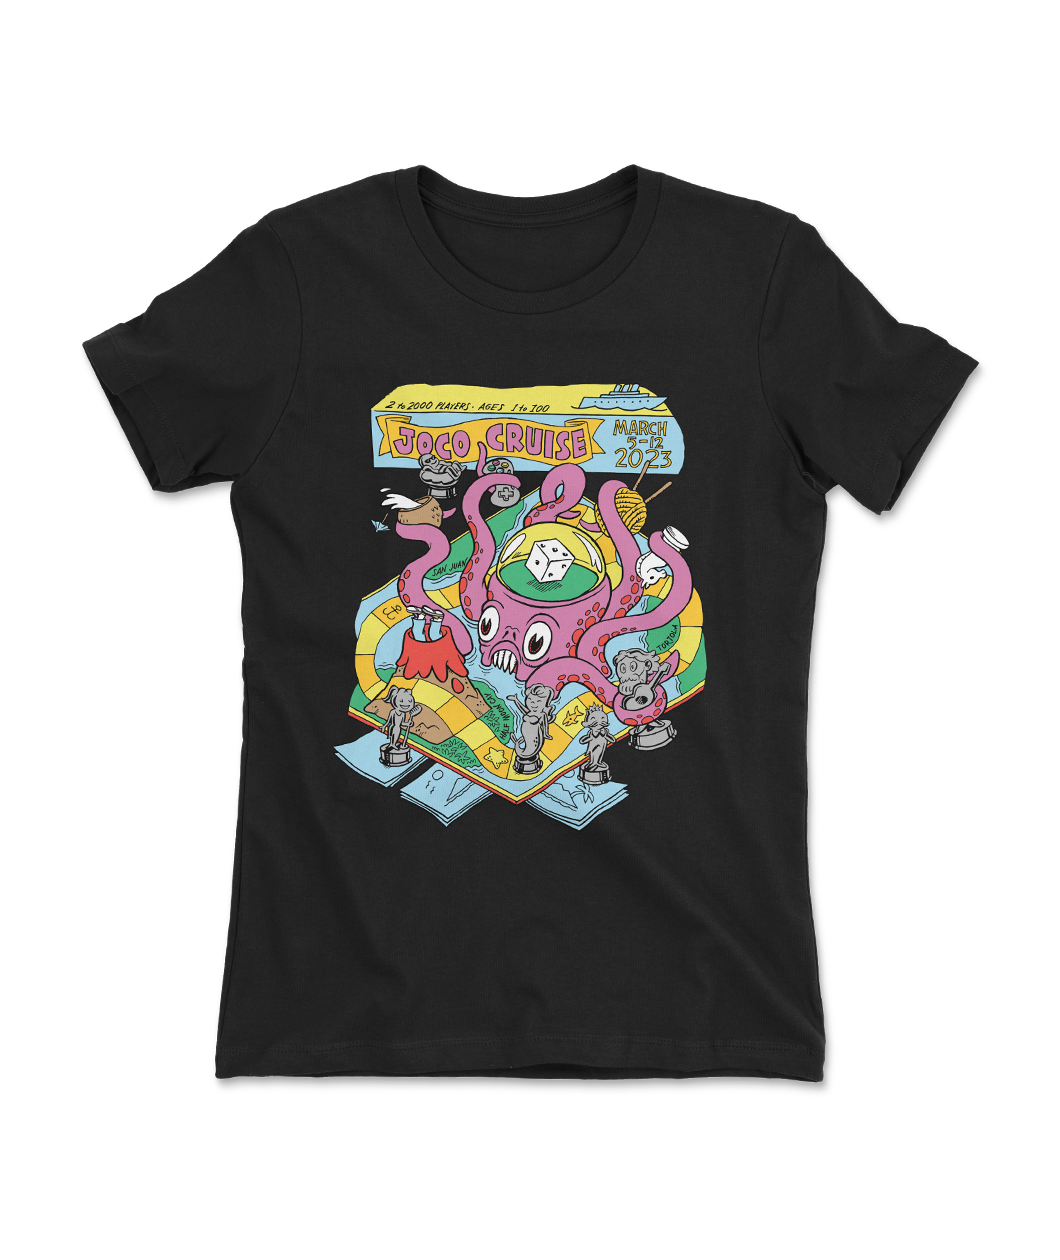 A curved black t-shirt with the 2023 Joco Cruise design on the front featuring a pink and purple kraken holding various objects such as a coconut, ball of yarn and seahorse. There is a die in a dome on its head and other statues surrounding it.